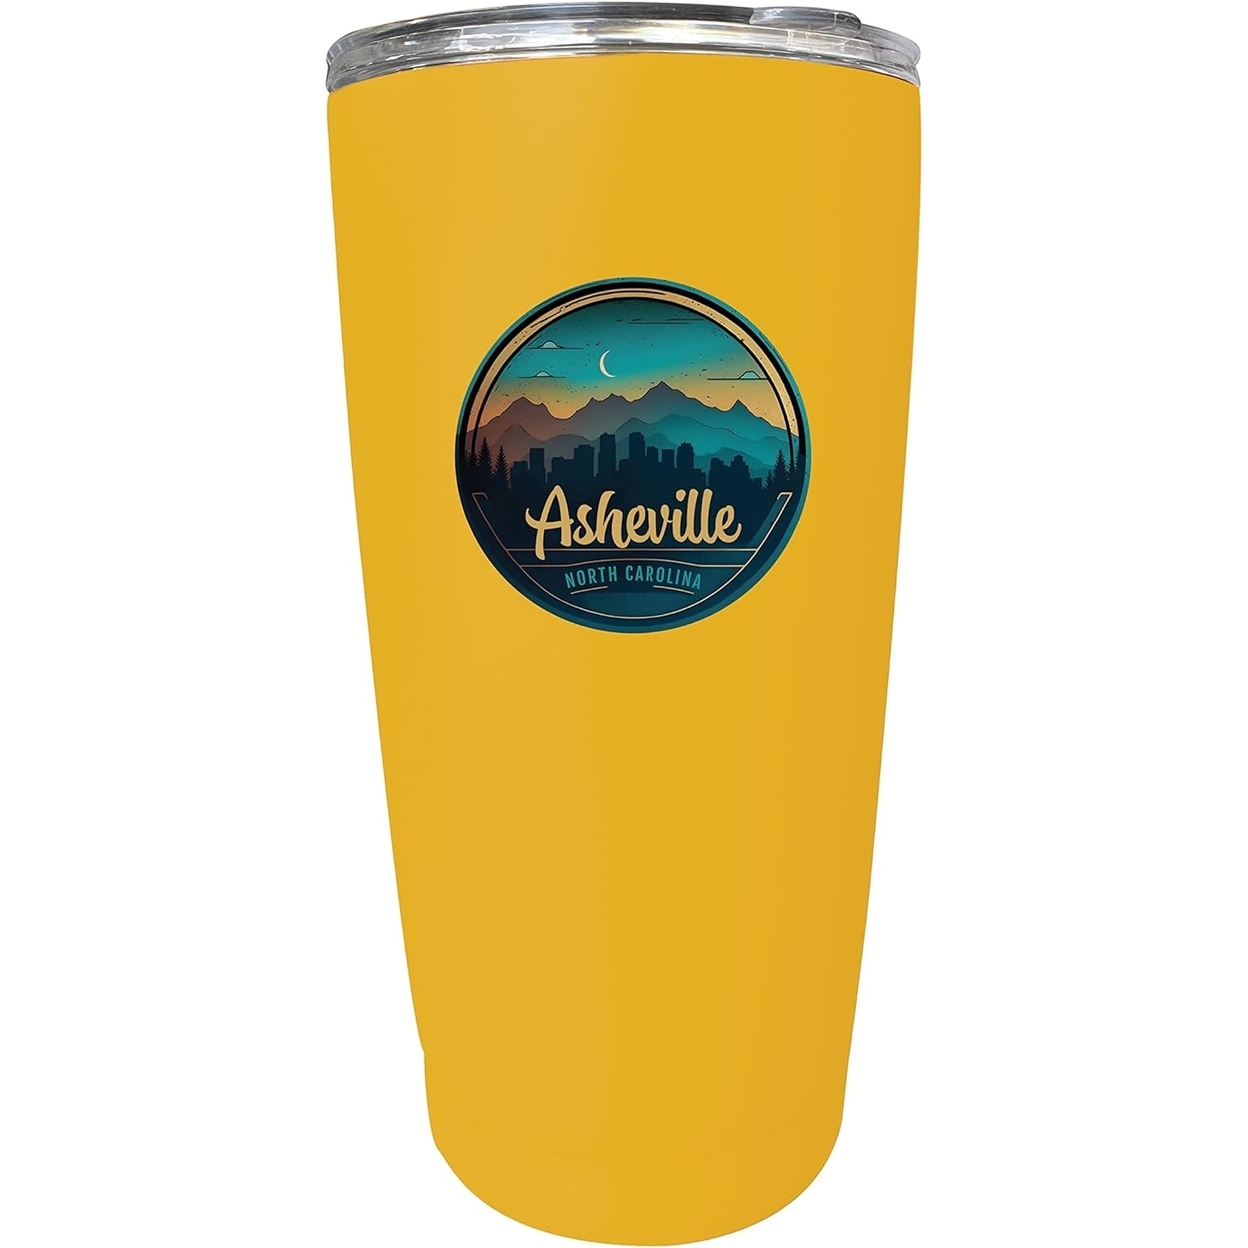 Asheville North Carolina Souvenir 16 Oz Stainless Steel Insulated Tumbler - Yellow